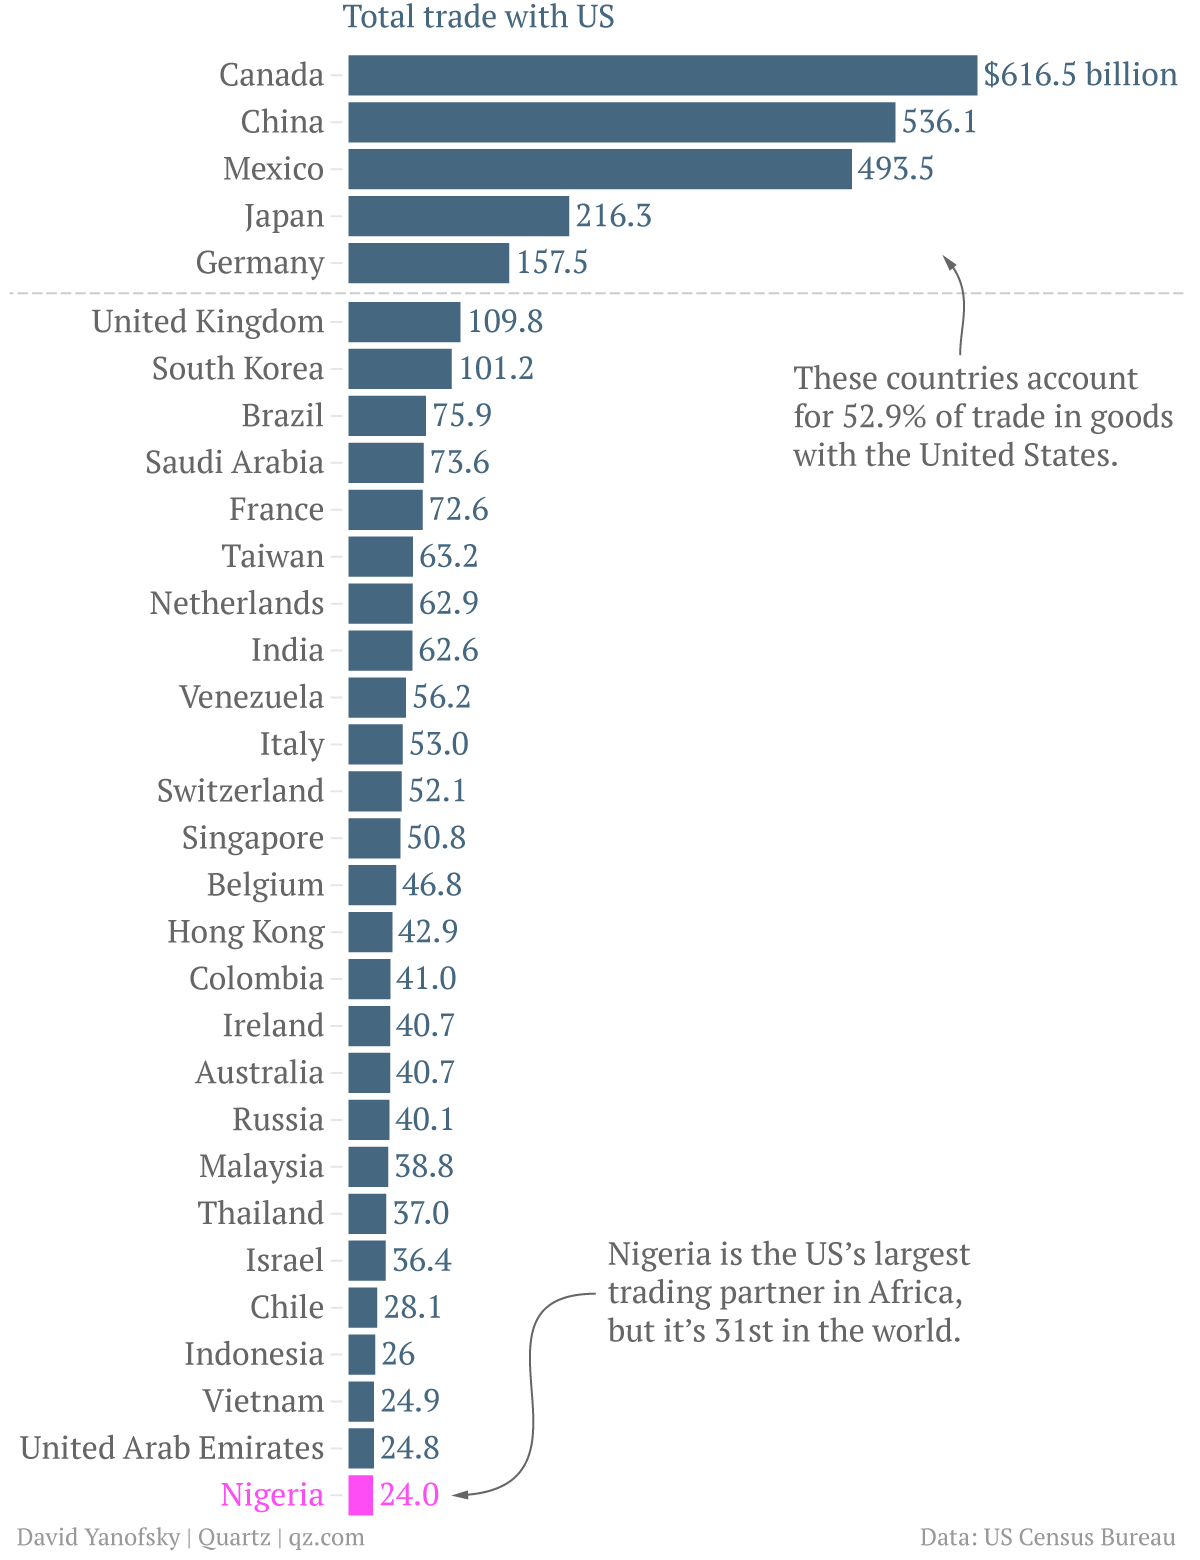 How little does the US trade with Africa? Very little.